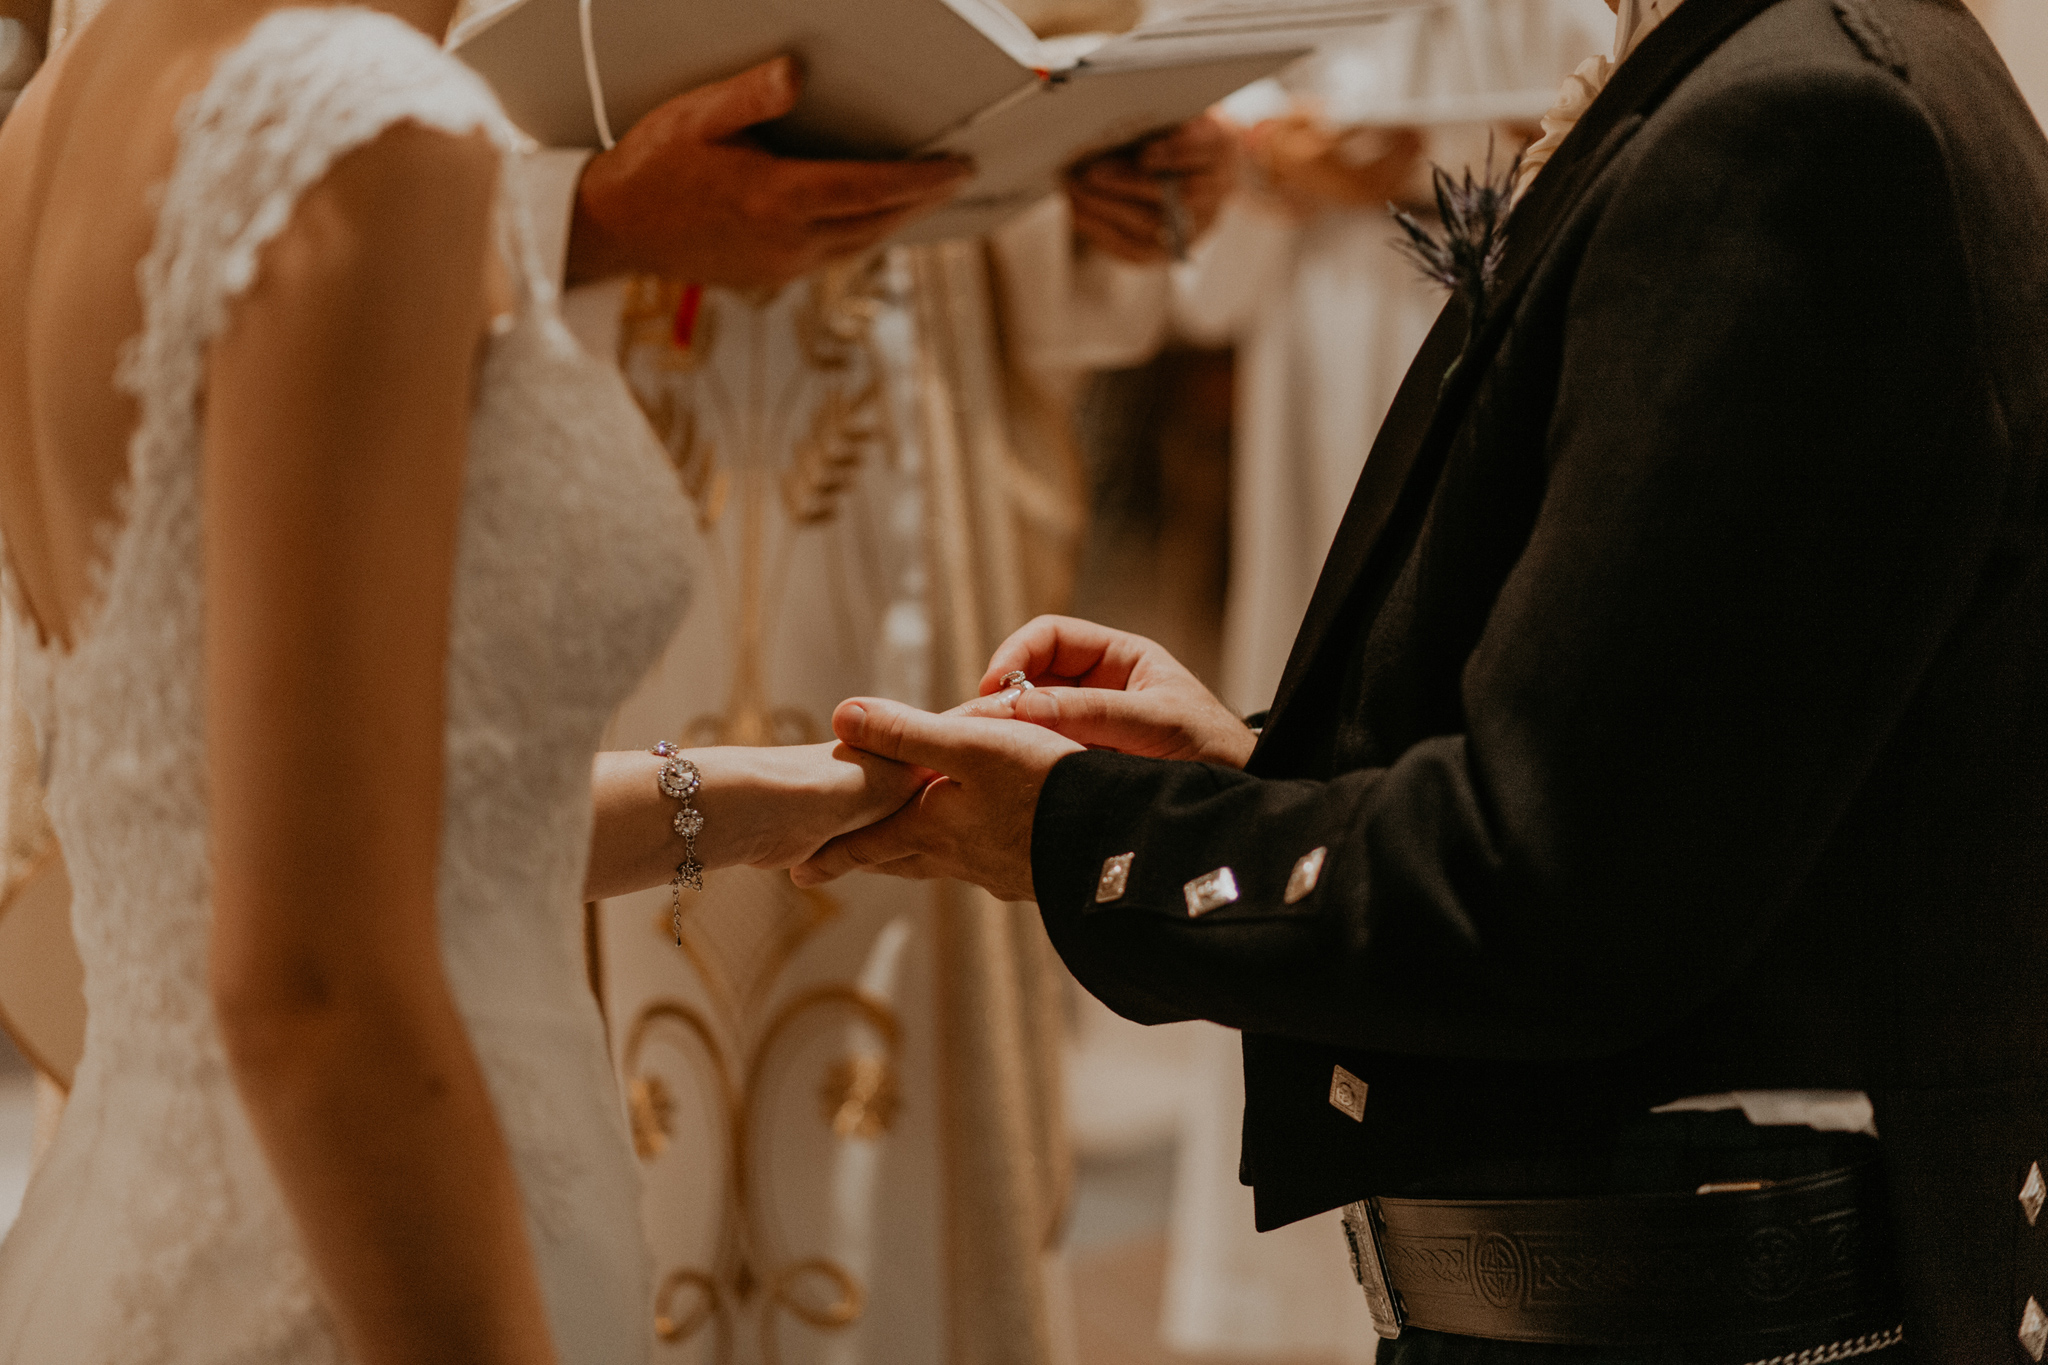 Groom smiling while placing ring on bride's finger